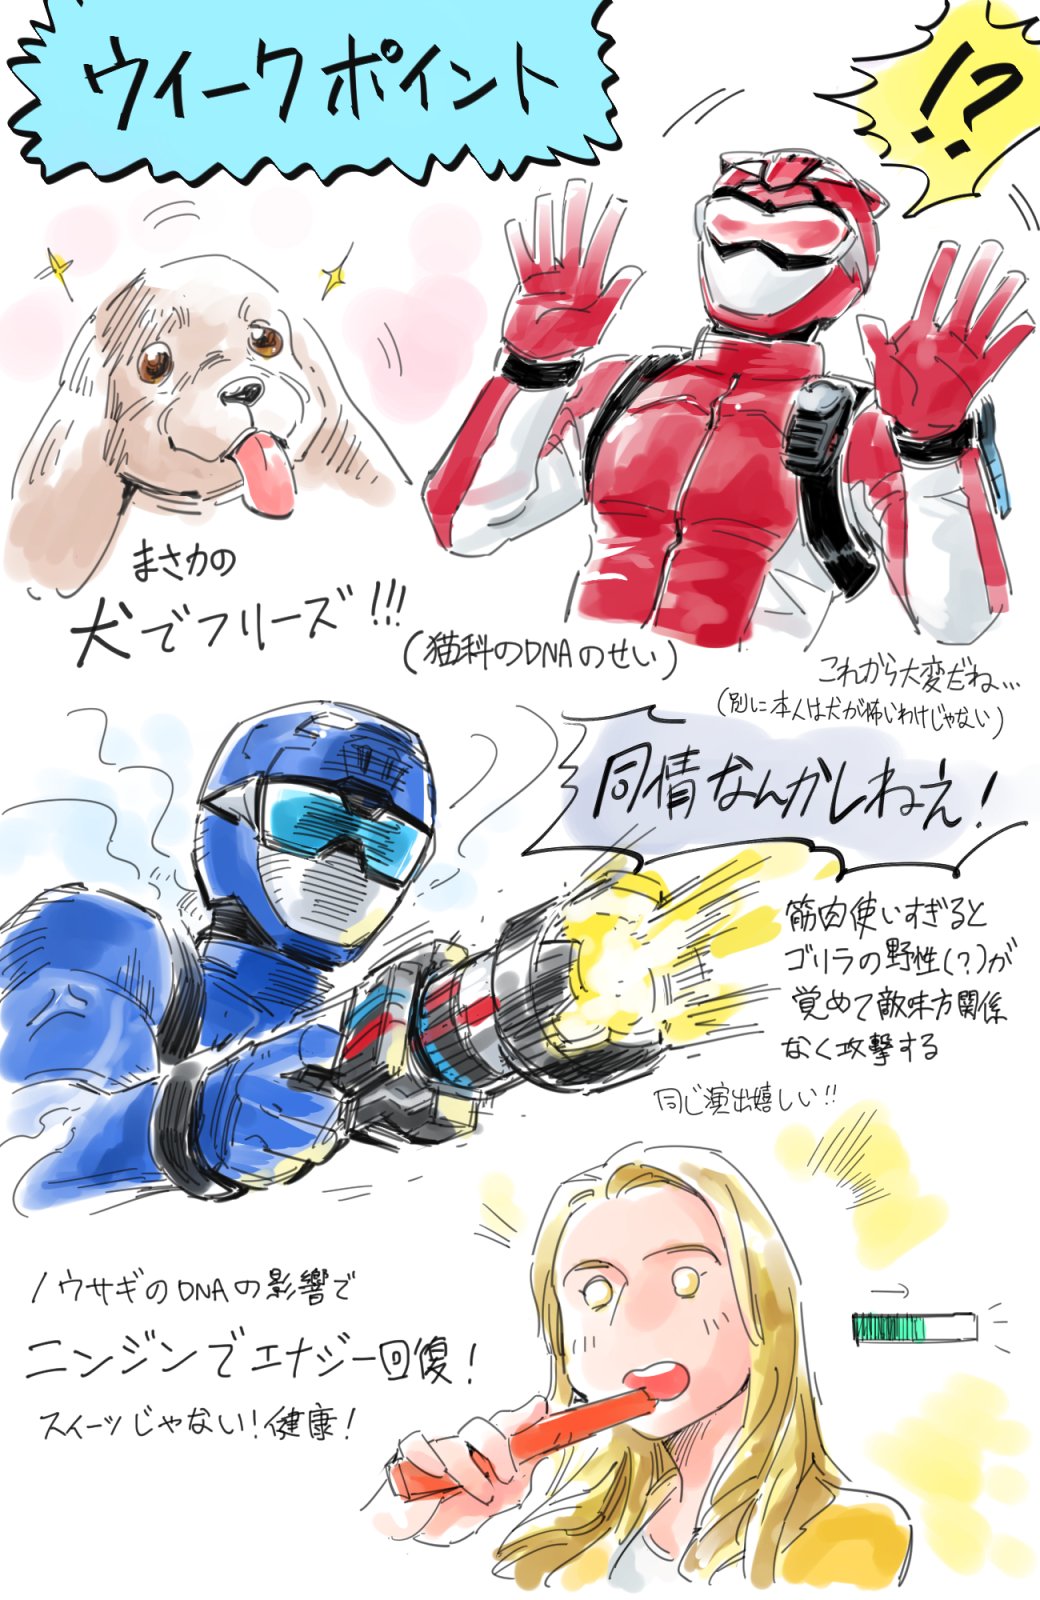 !? 1girl 2boys blonde_hair blue_buster carrot dog eating firing gun highres mujun_kamen multiple_boys power_rangers power_rangers_beast_morphers red_buster sparkle super_sentai tokumei_sentai_go-busters tongue tongue_out translation_request weapon yellow_eyes zoey_reeves